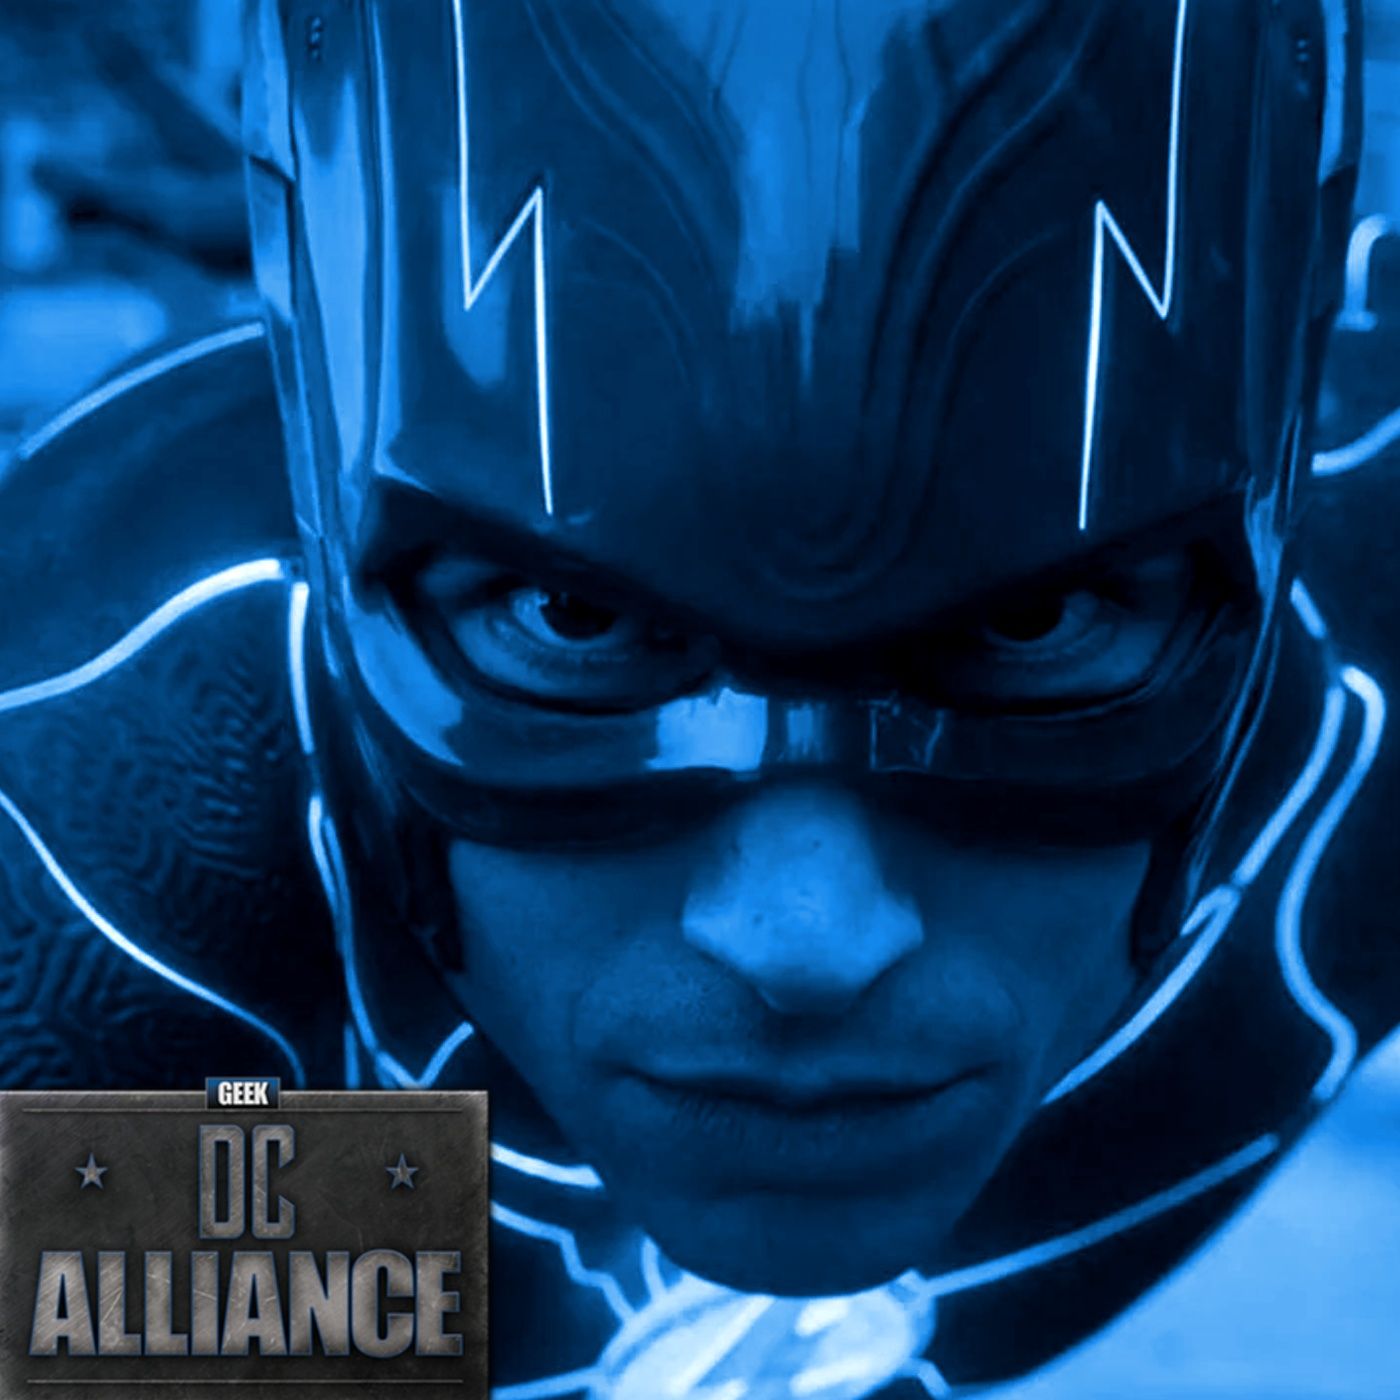 World of Heroes Sizzle Reel- DC Alliance Ch. 94